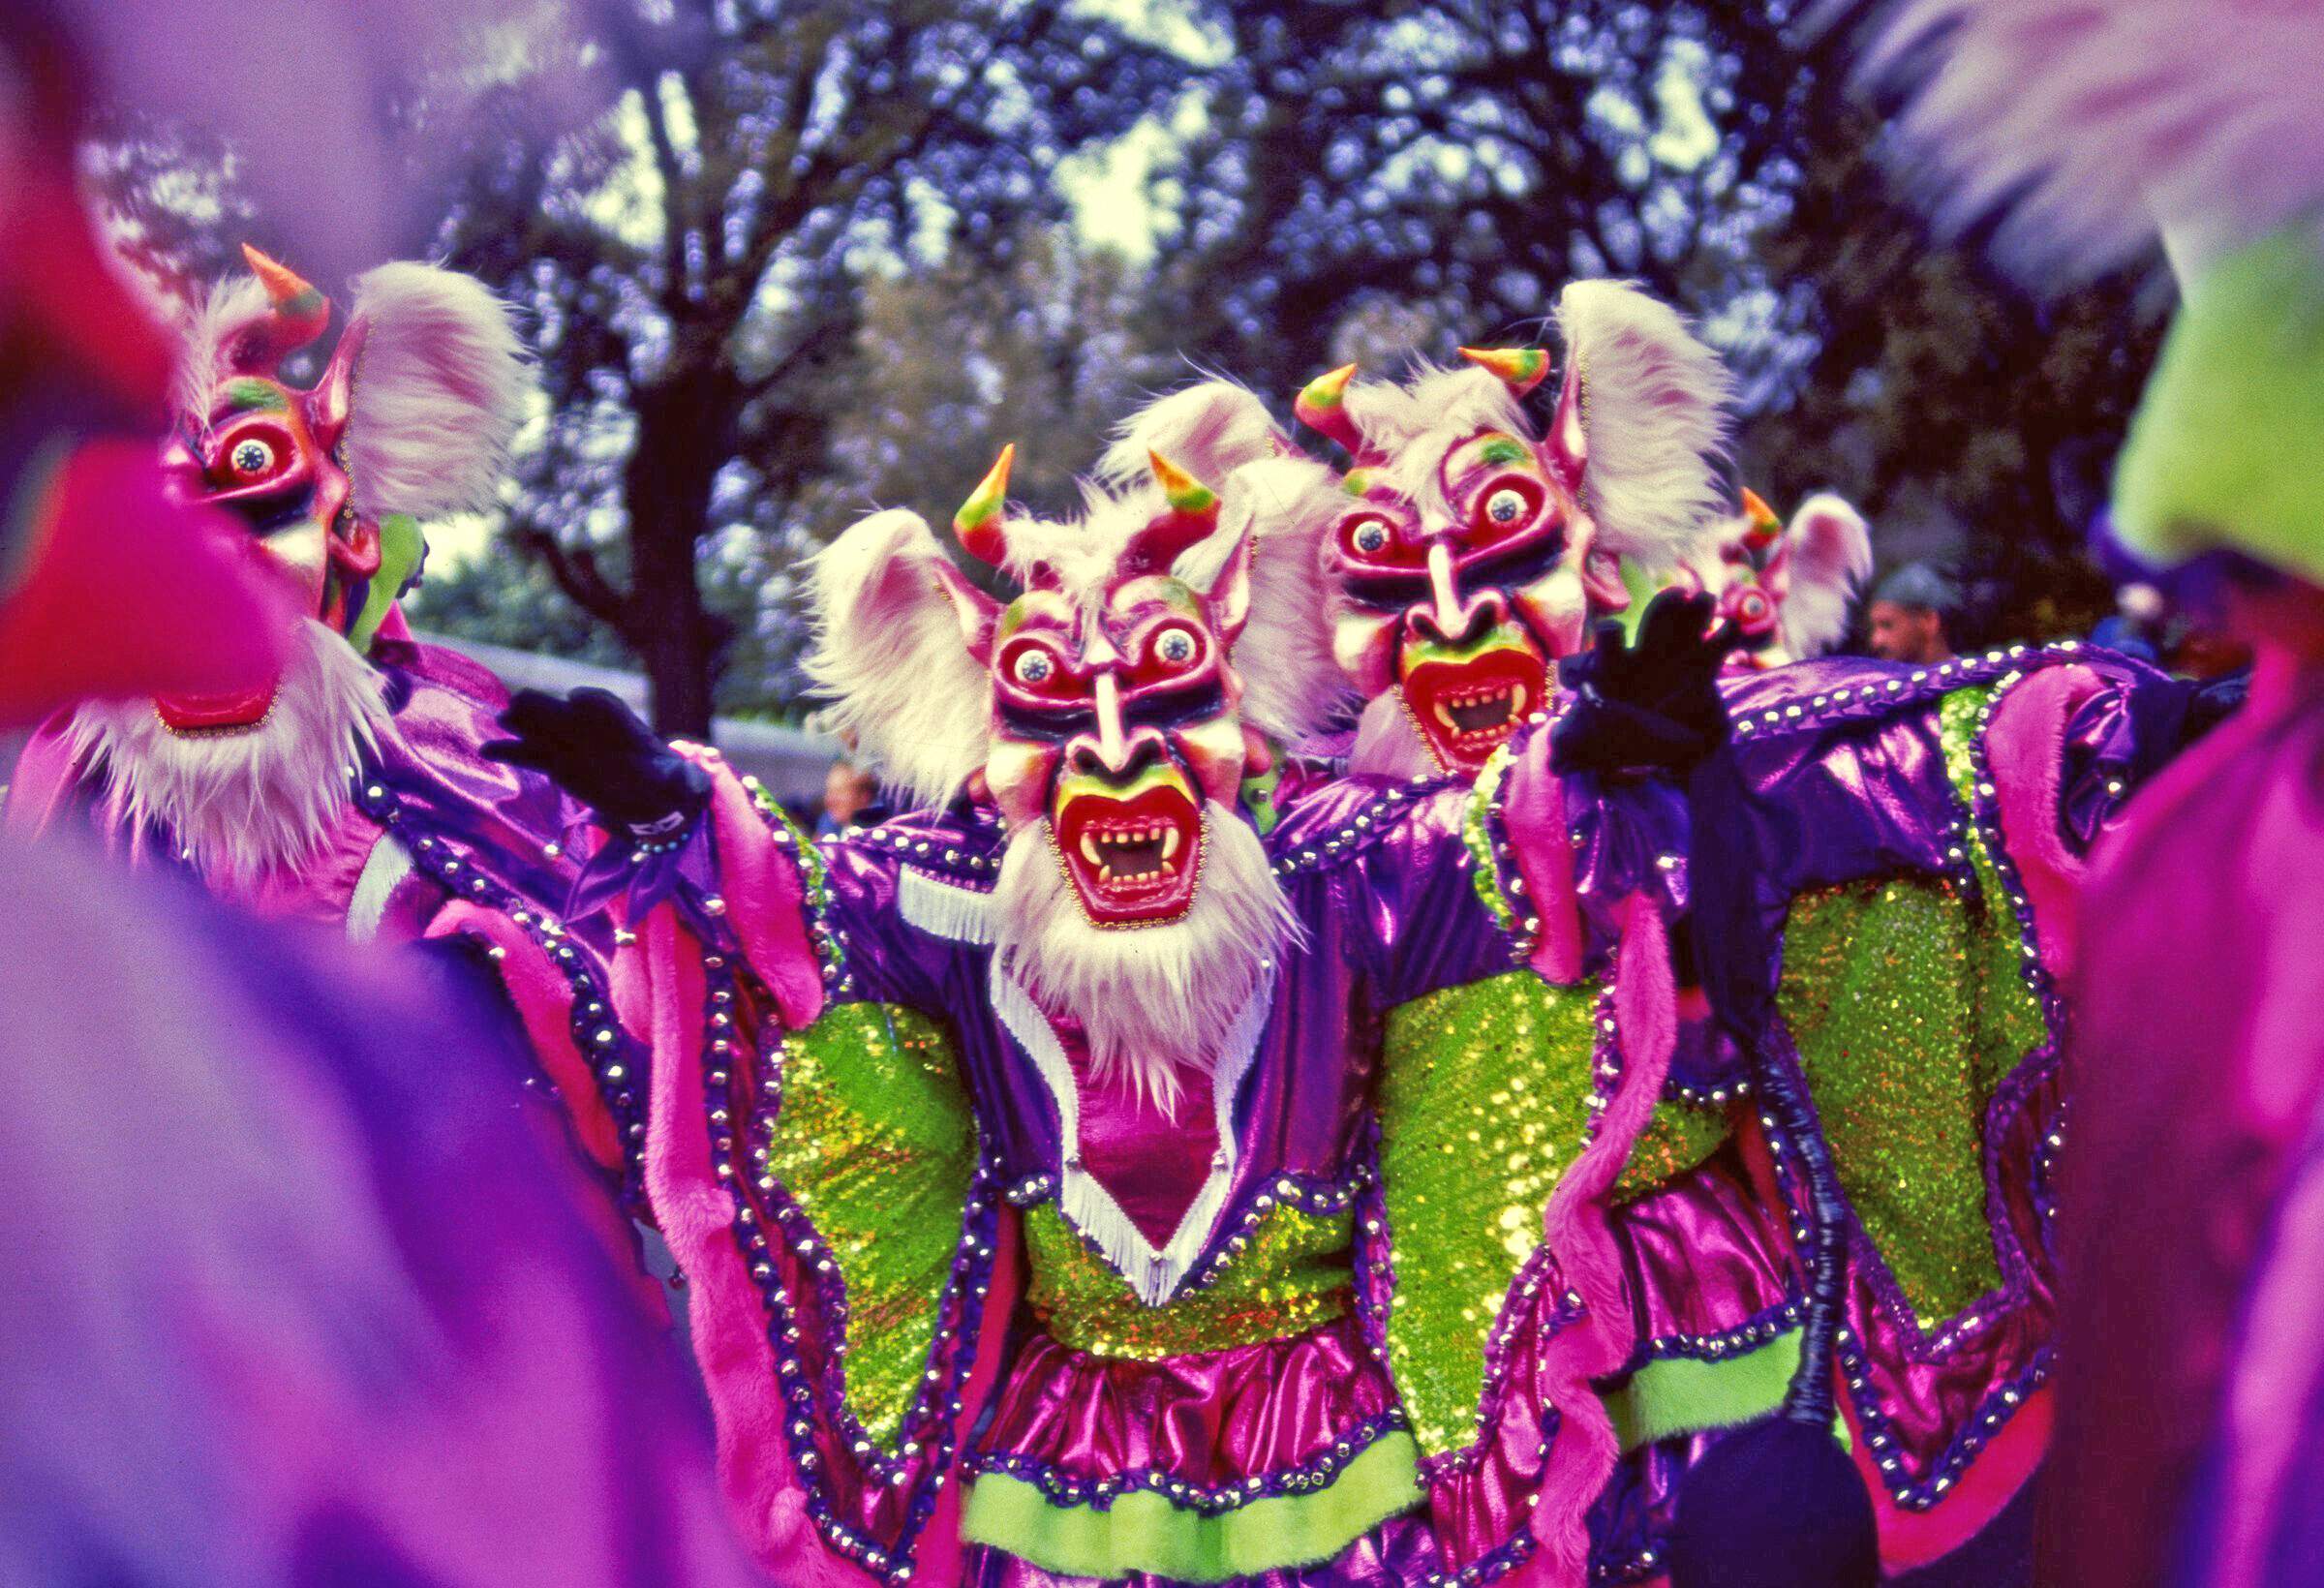 People wearing vibrant costumes and grotesque masks.